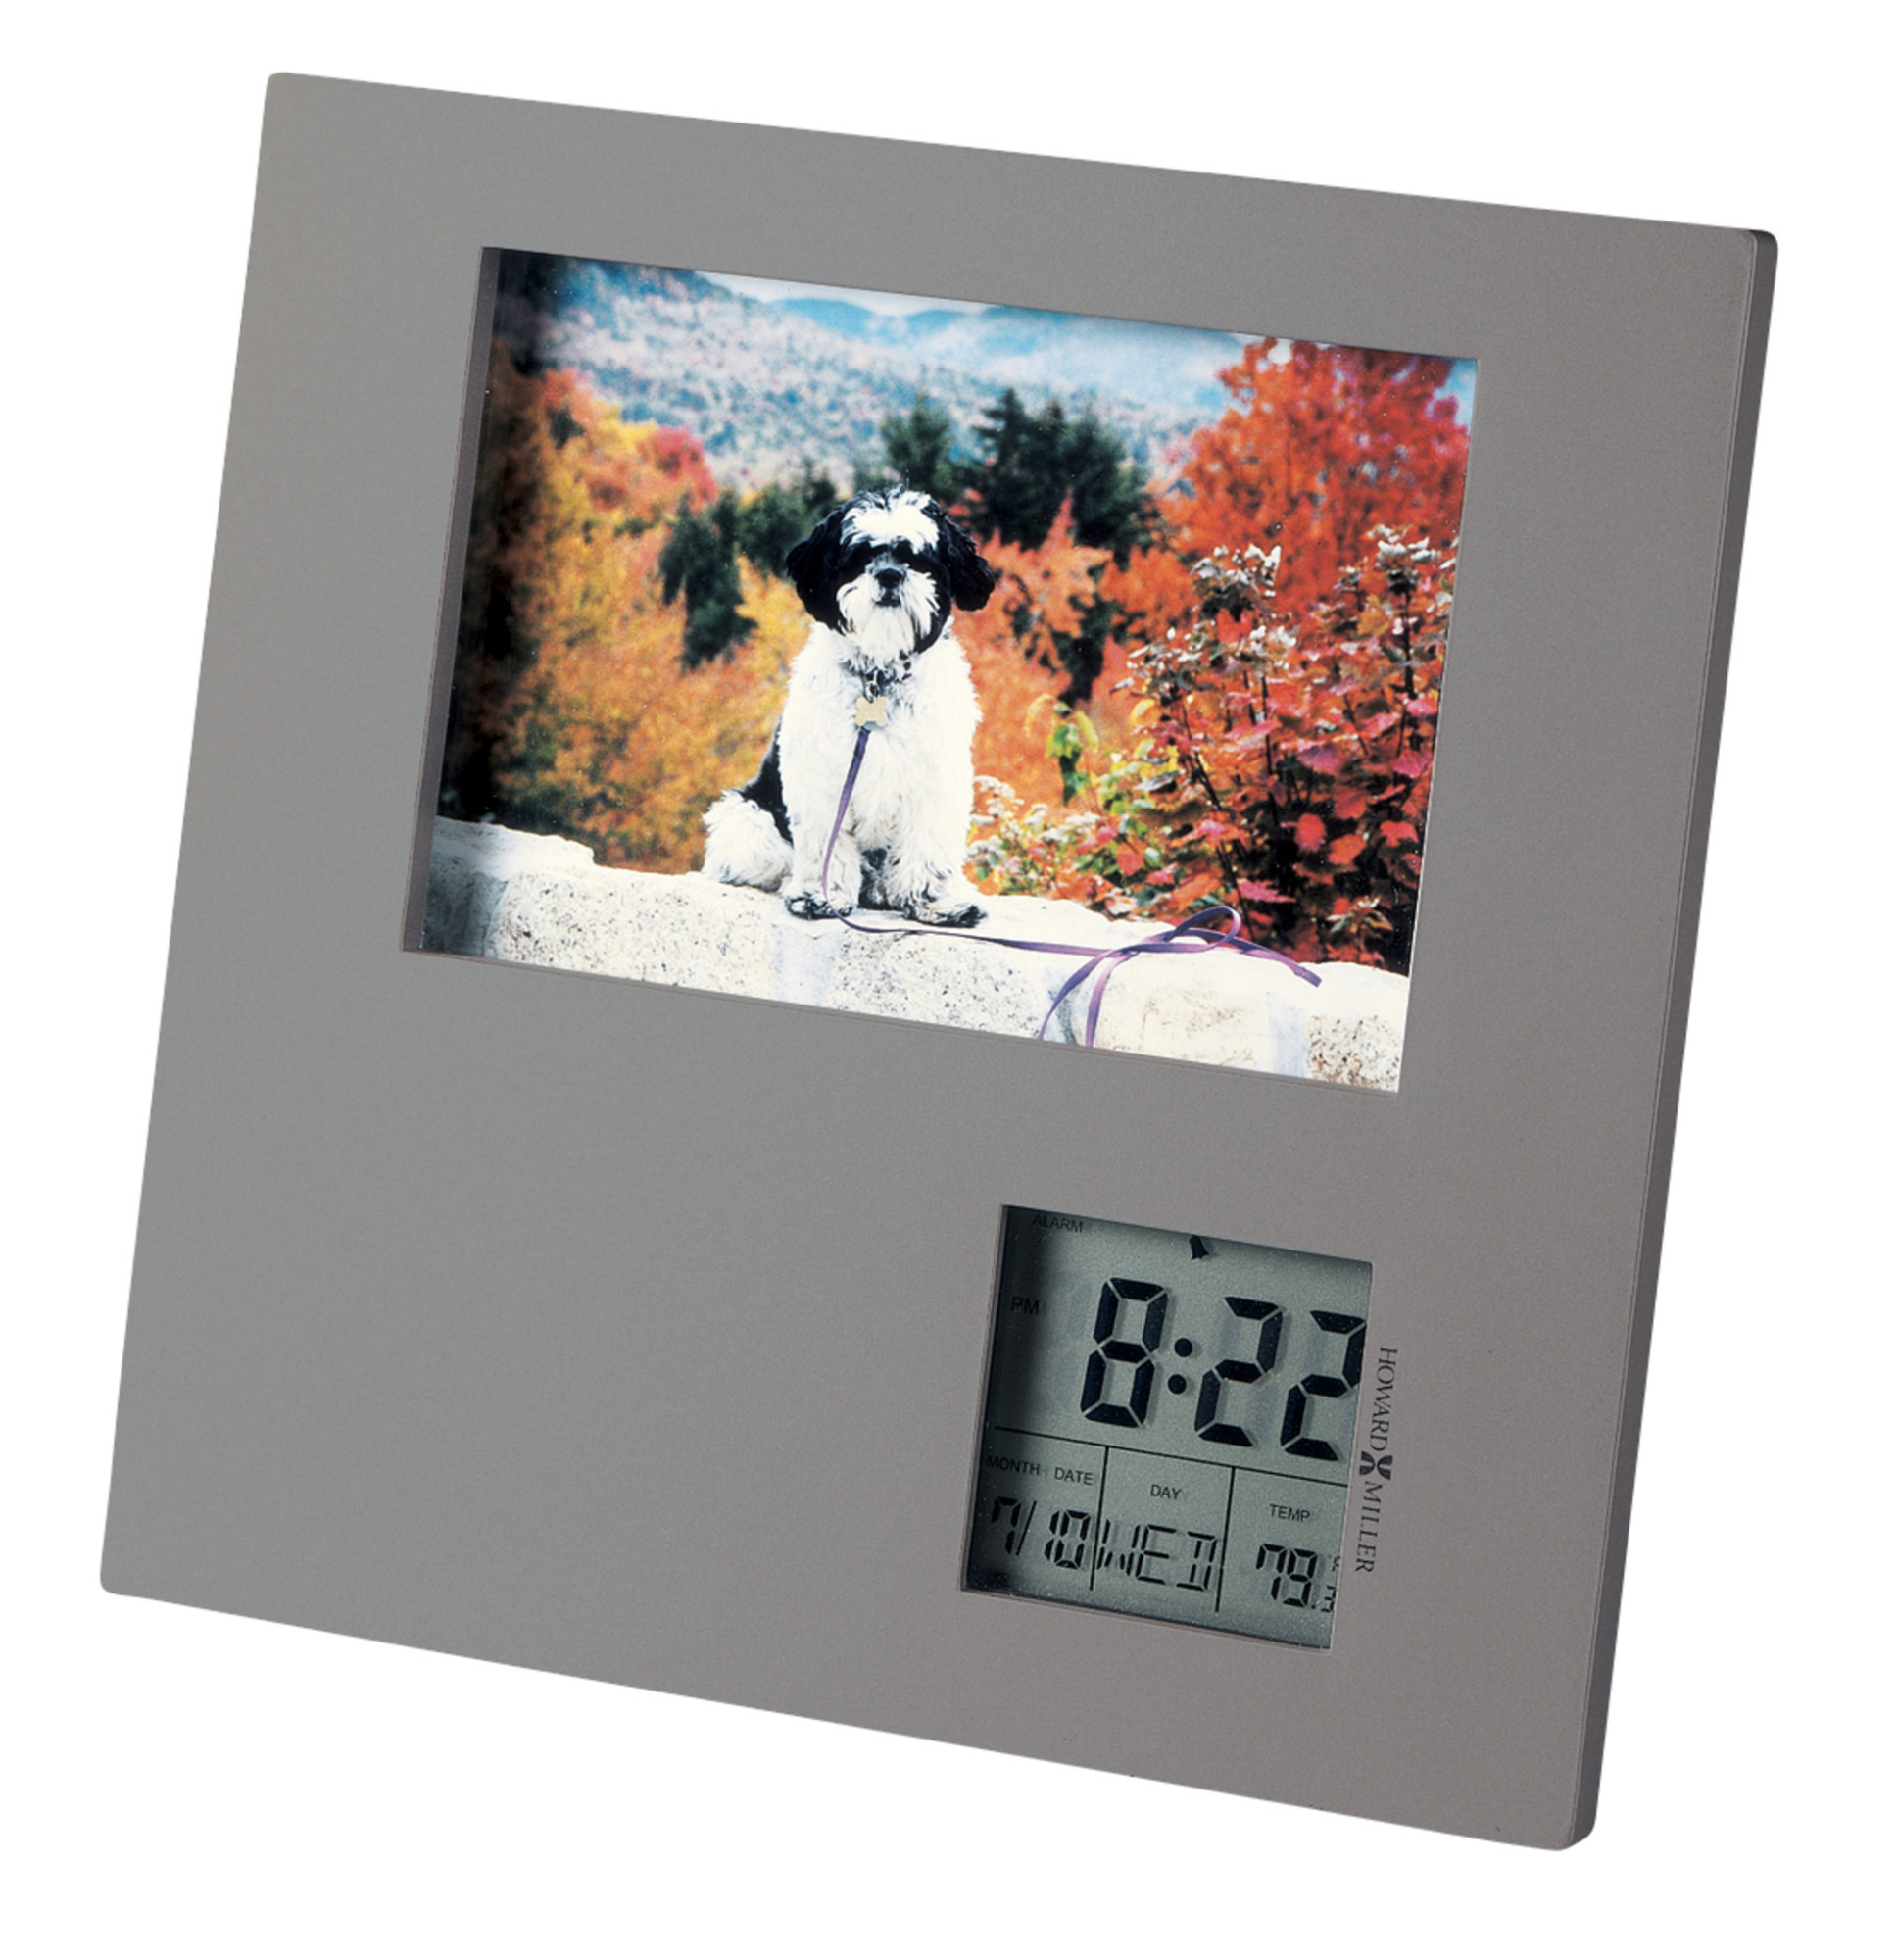 Howard Miller Picture This Table Clock 645-553 – Titanium Photo Frame & LCD Digital Display with Quartz, Alarm Movement - image 2 of 2